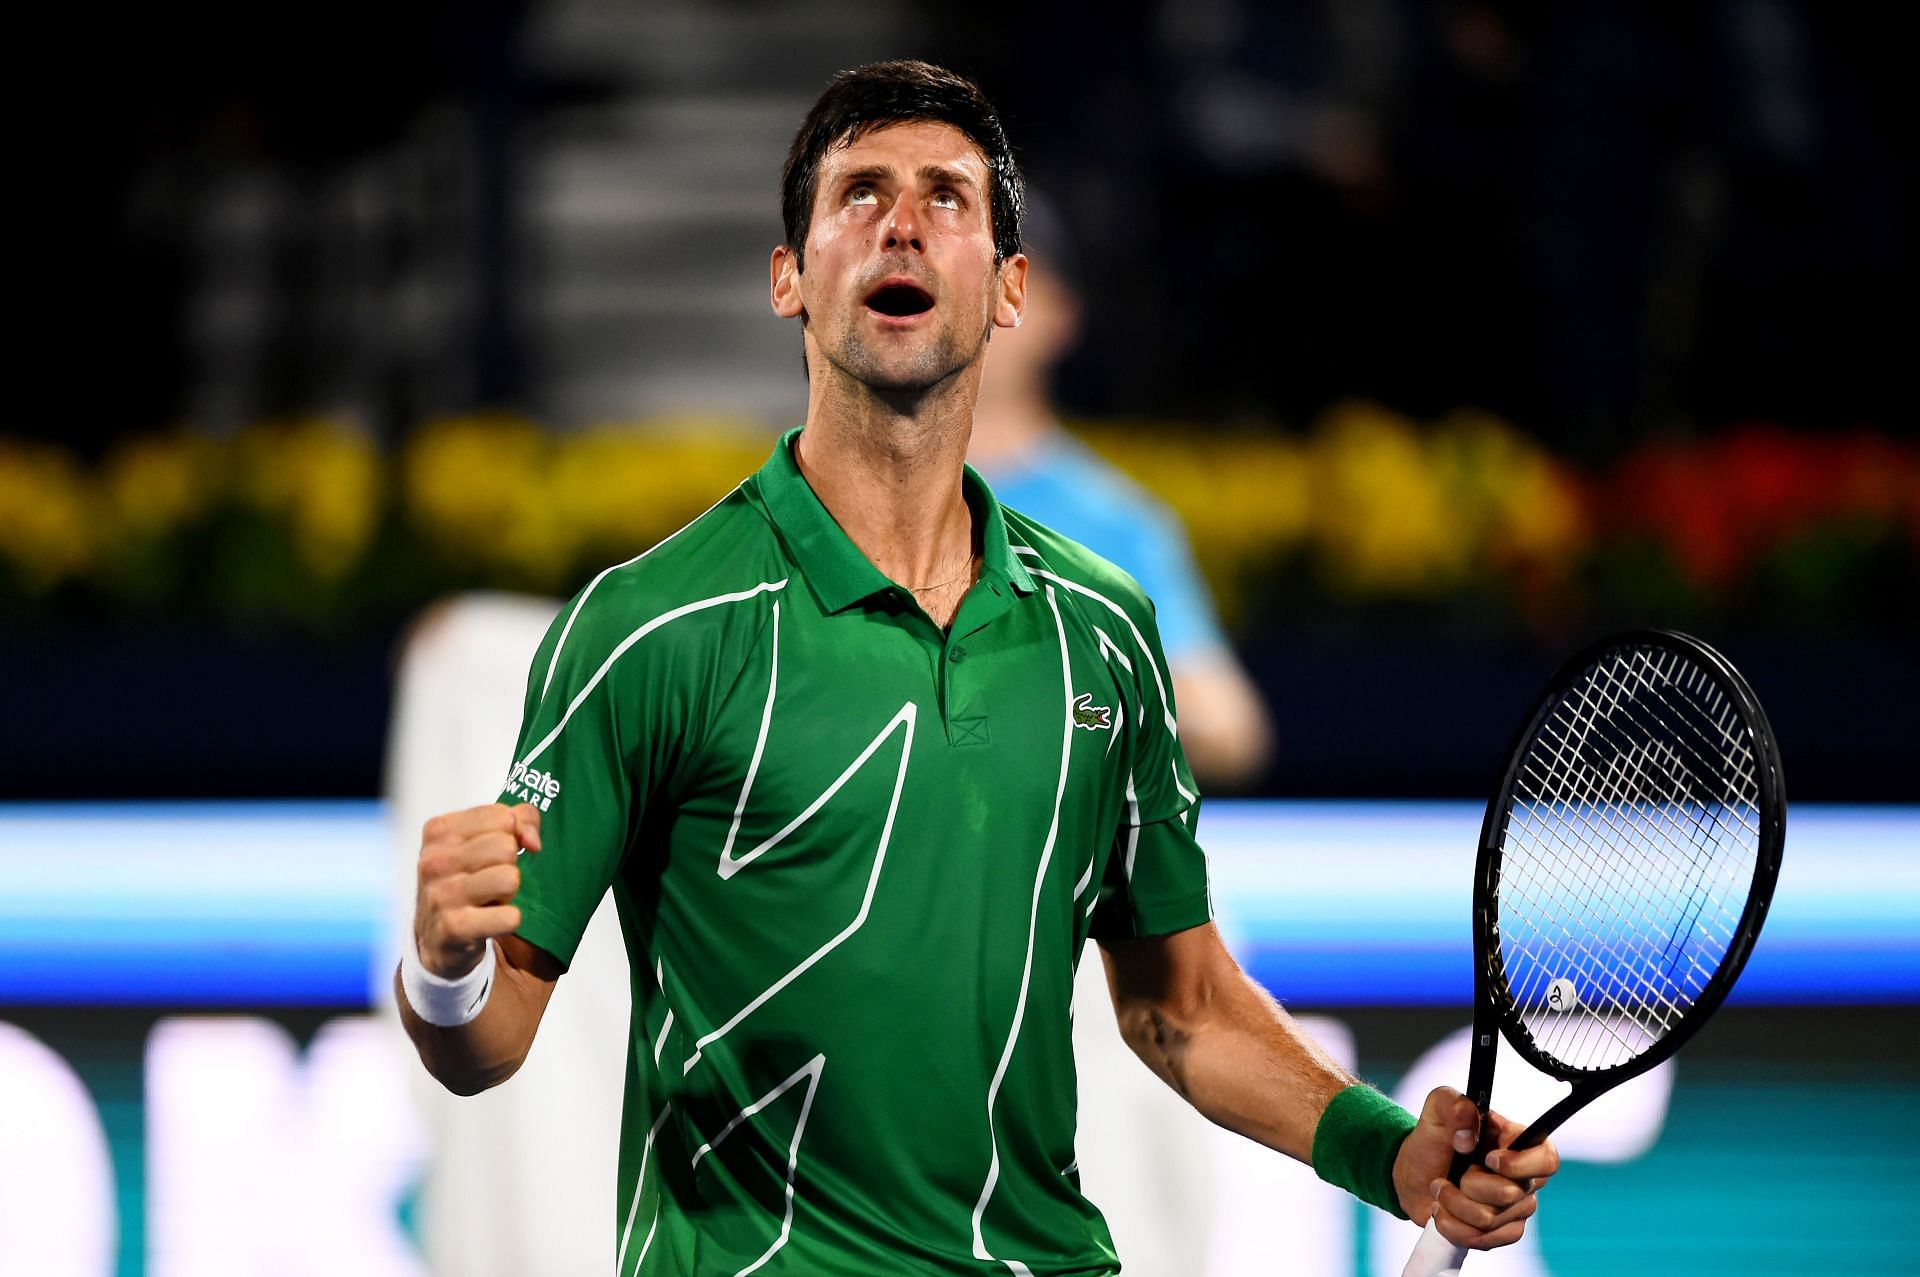 Novak Djokovic is reportedly going to play at the 2022 Dubai Tennis Championships from Febrary 21-26